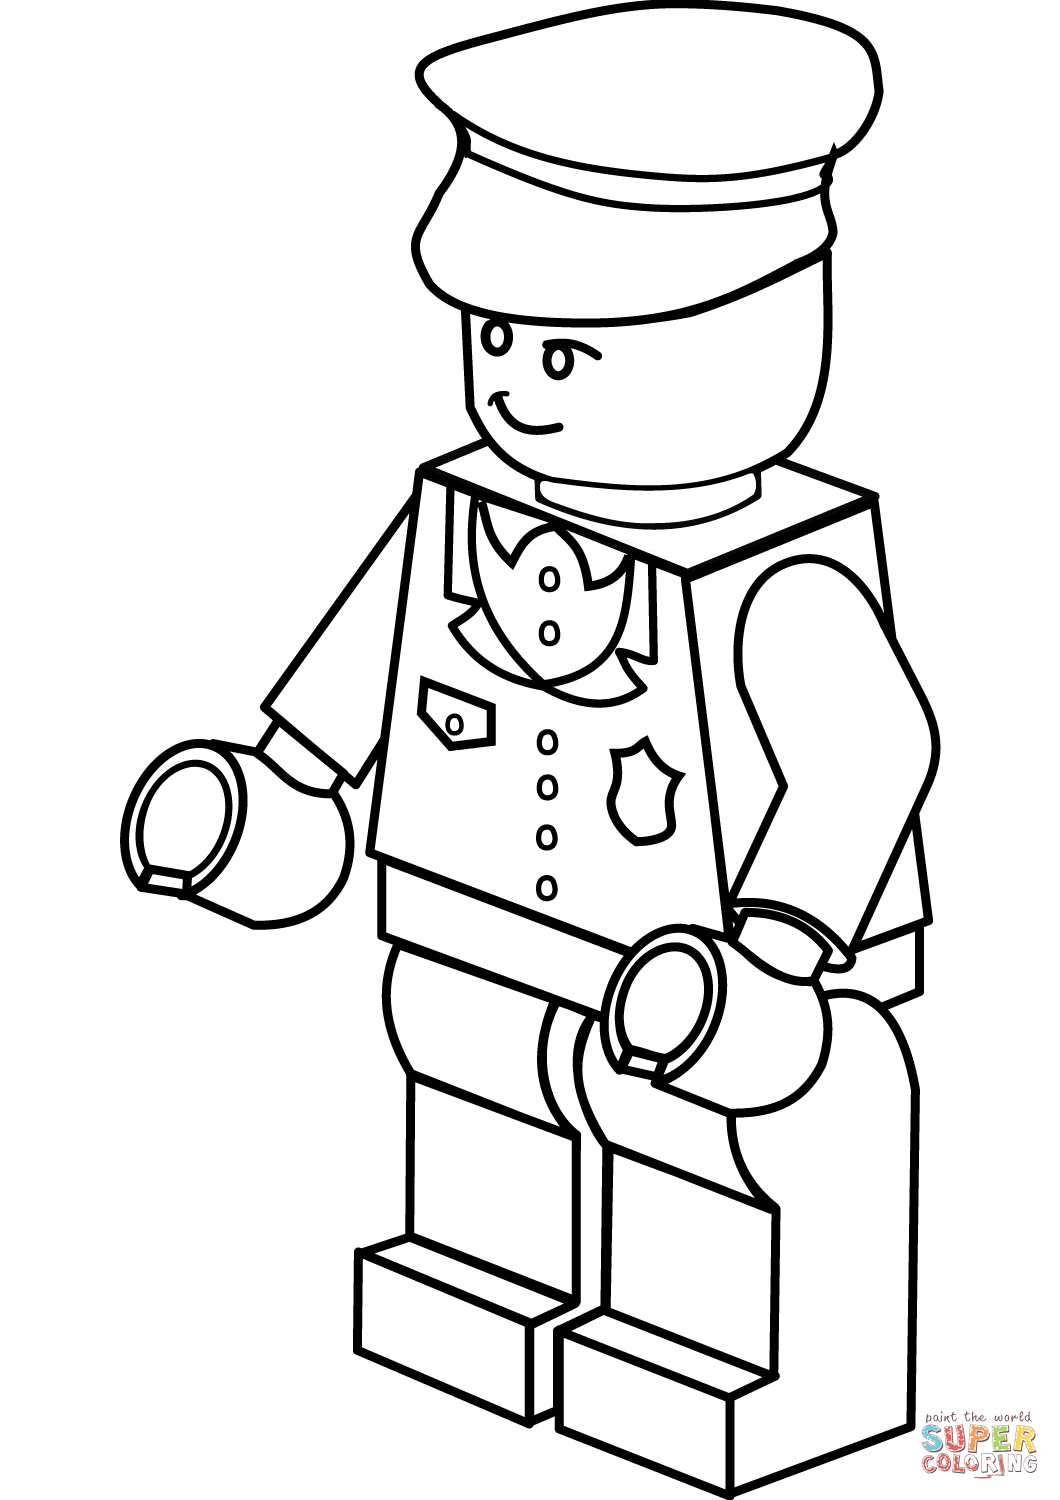 Lego Policeman coloring page | Free Printable Coloring Pages